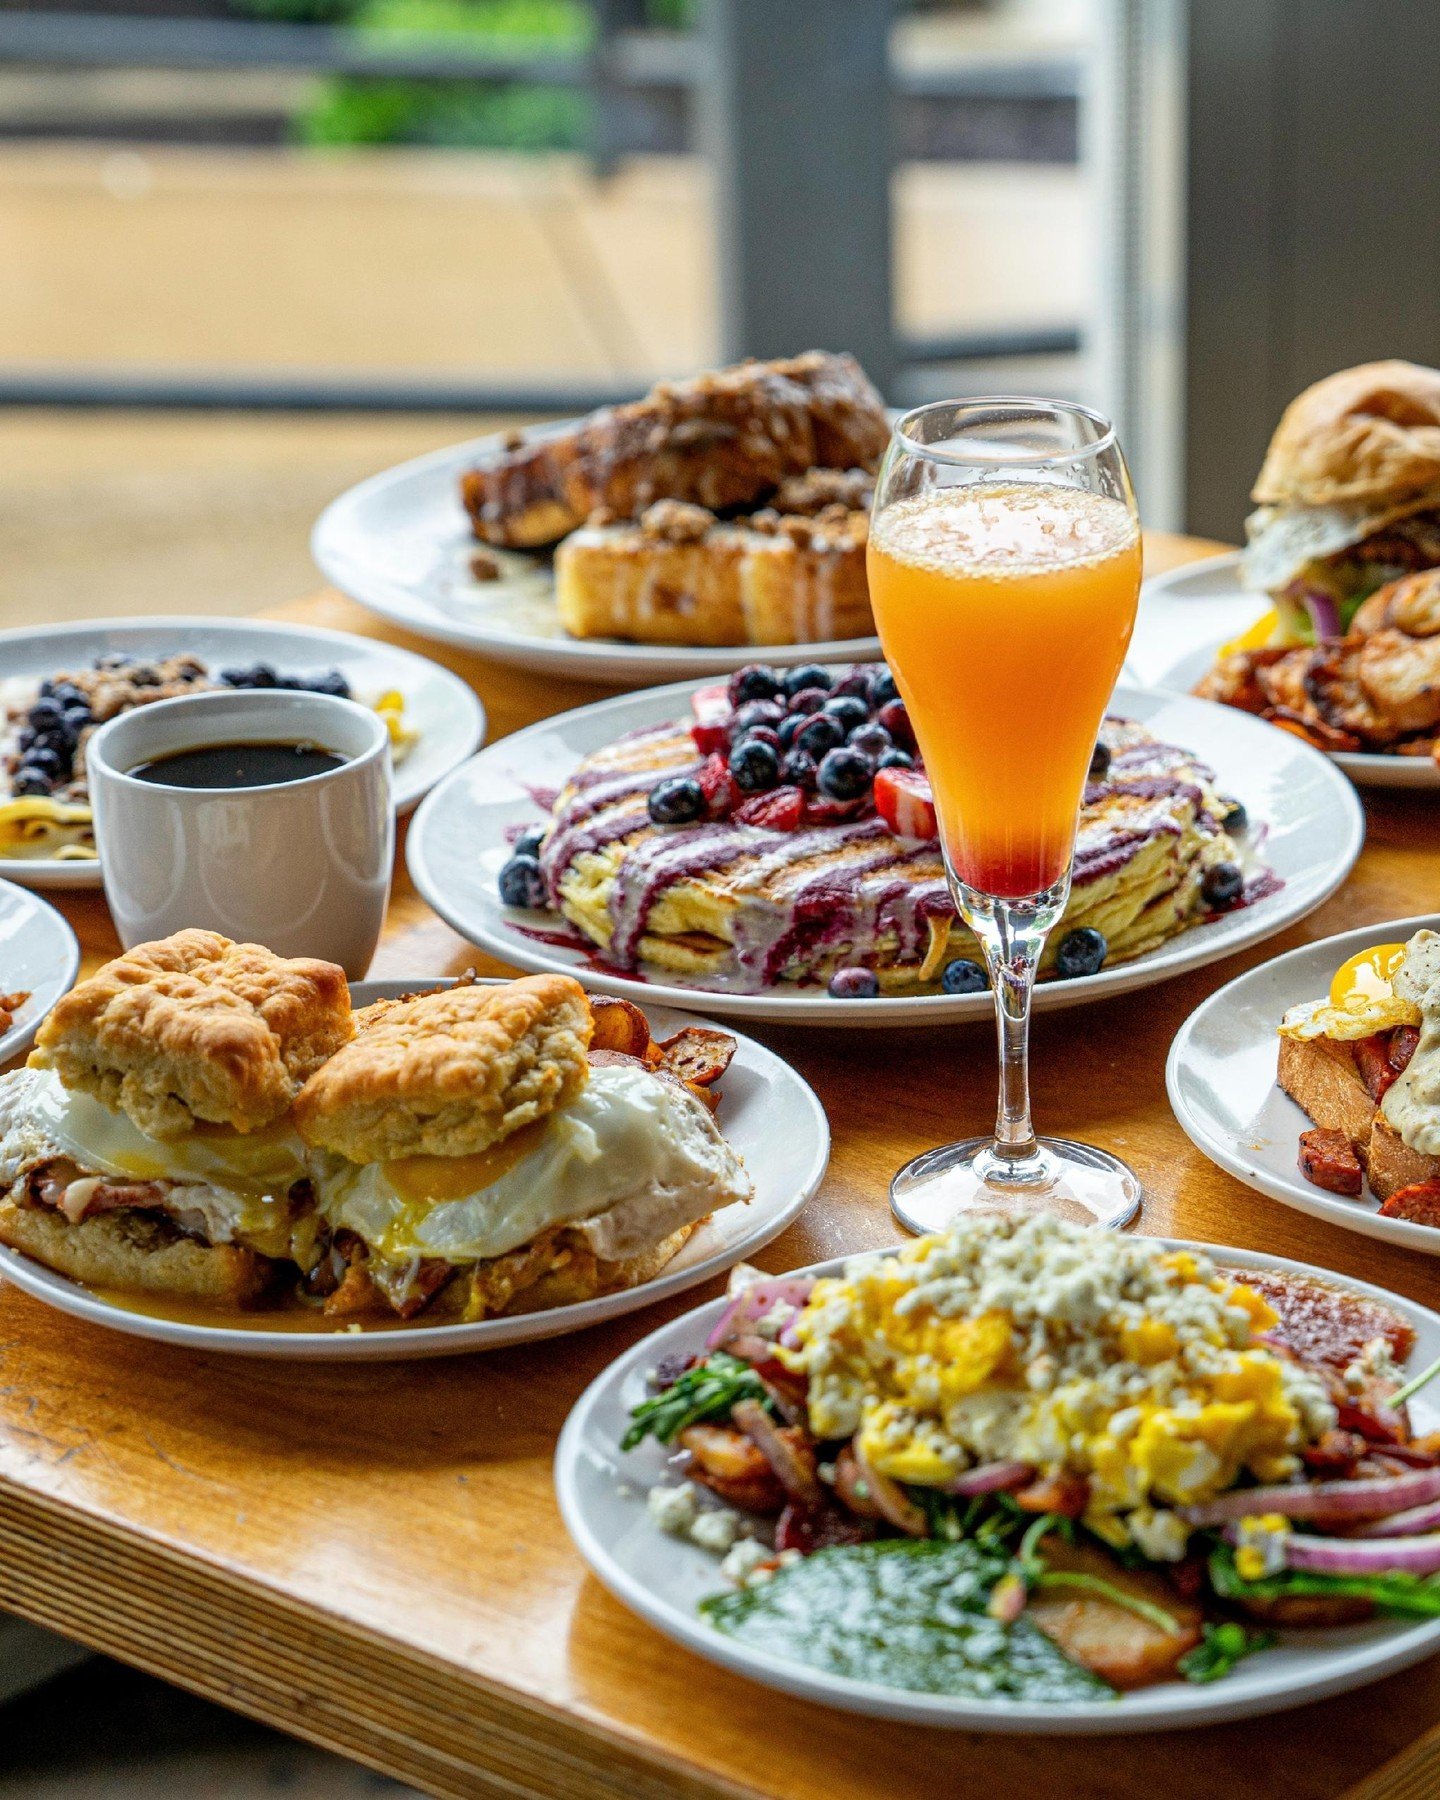 Rise and shine, it's time for a delicious breakfast from Rooster 🍳 

P.S. Mother's Day is only one week away, make sure you get your brunch plans in order 👀

Both locations open until 2pm 
#BrunchGoals #SundayFunday #FoodieHeaven